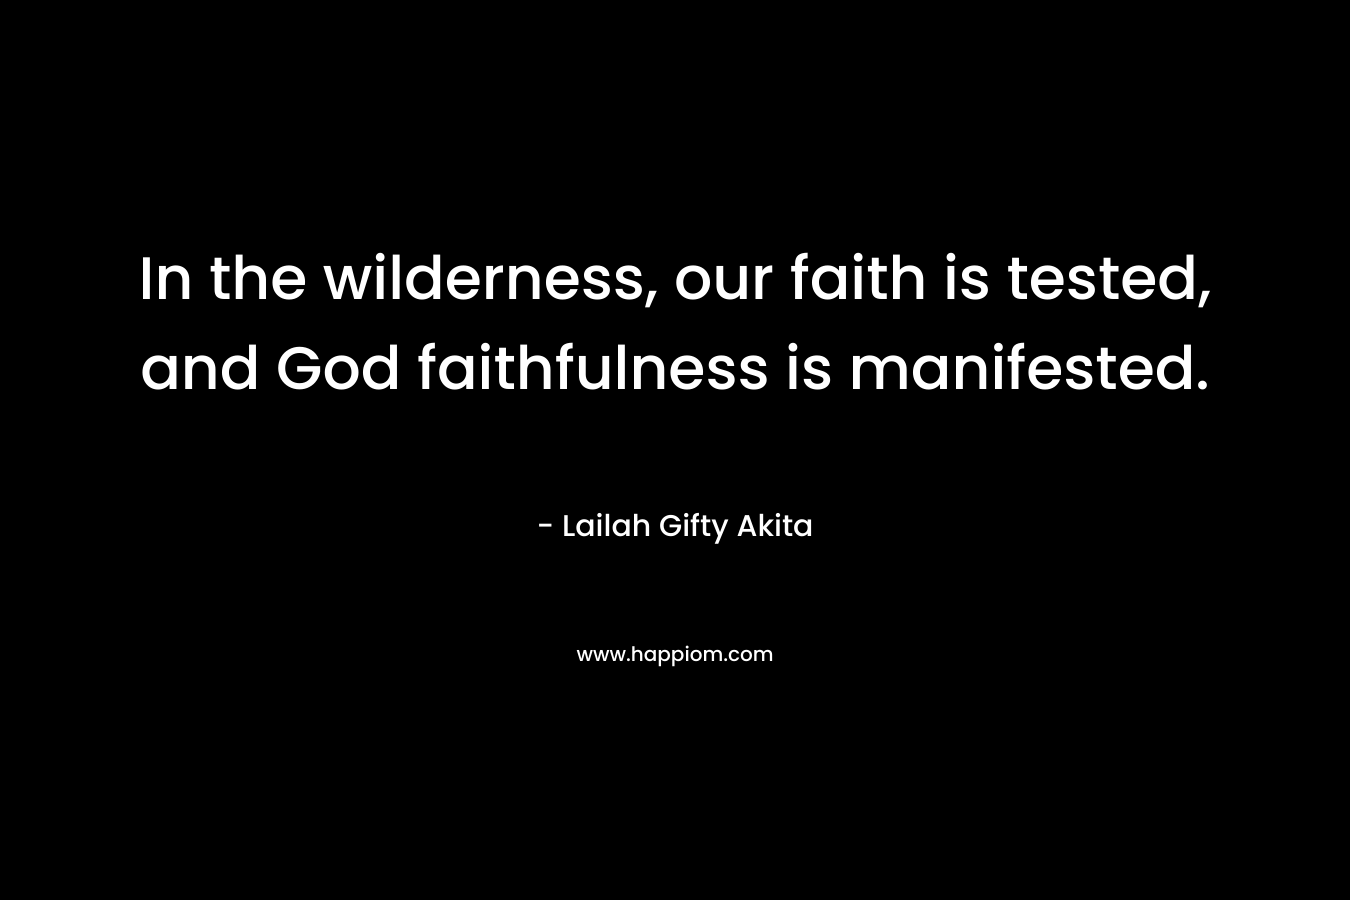 In the wilderness, our faith is tested, and God faithfulness is manifested. – Lailah Gifty Akita